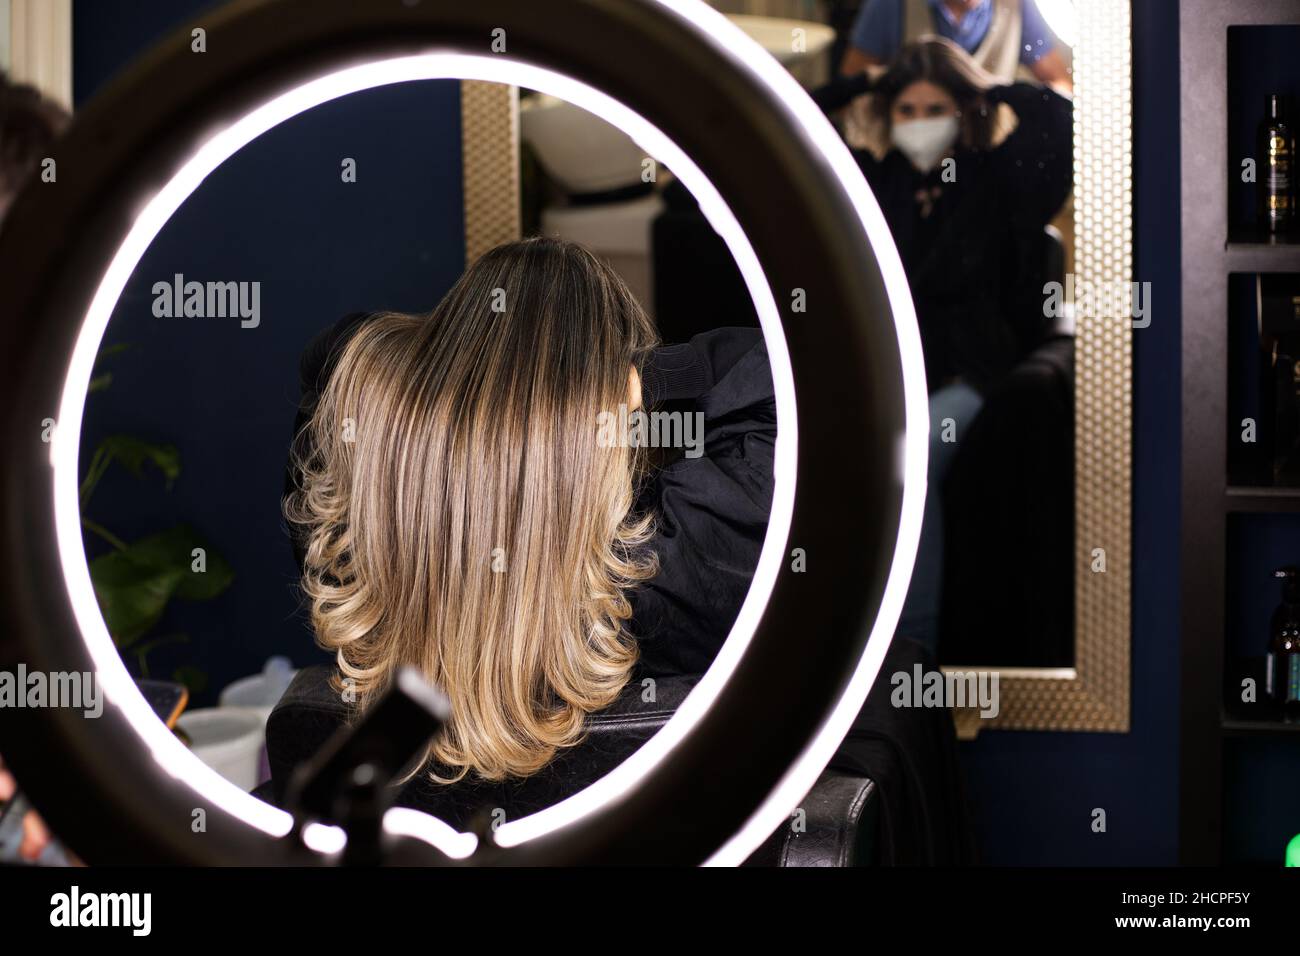 photo of long woman's hair with new look in hairdresser's salon through a light hoop Stock Photo